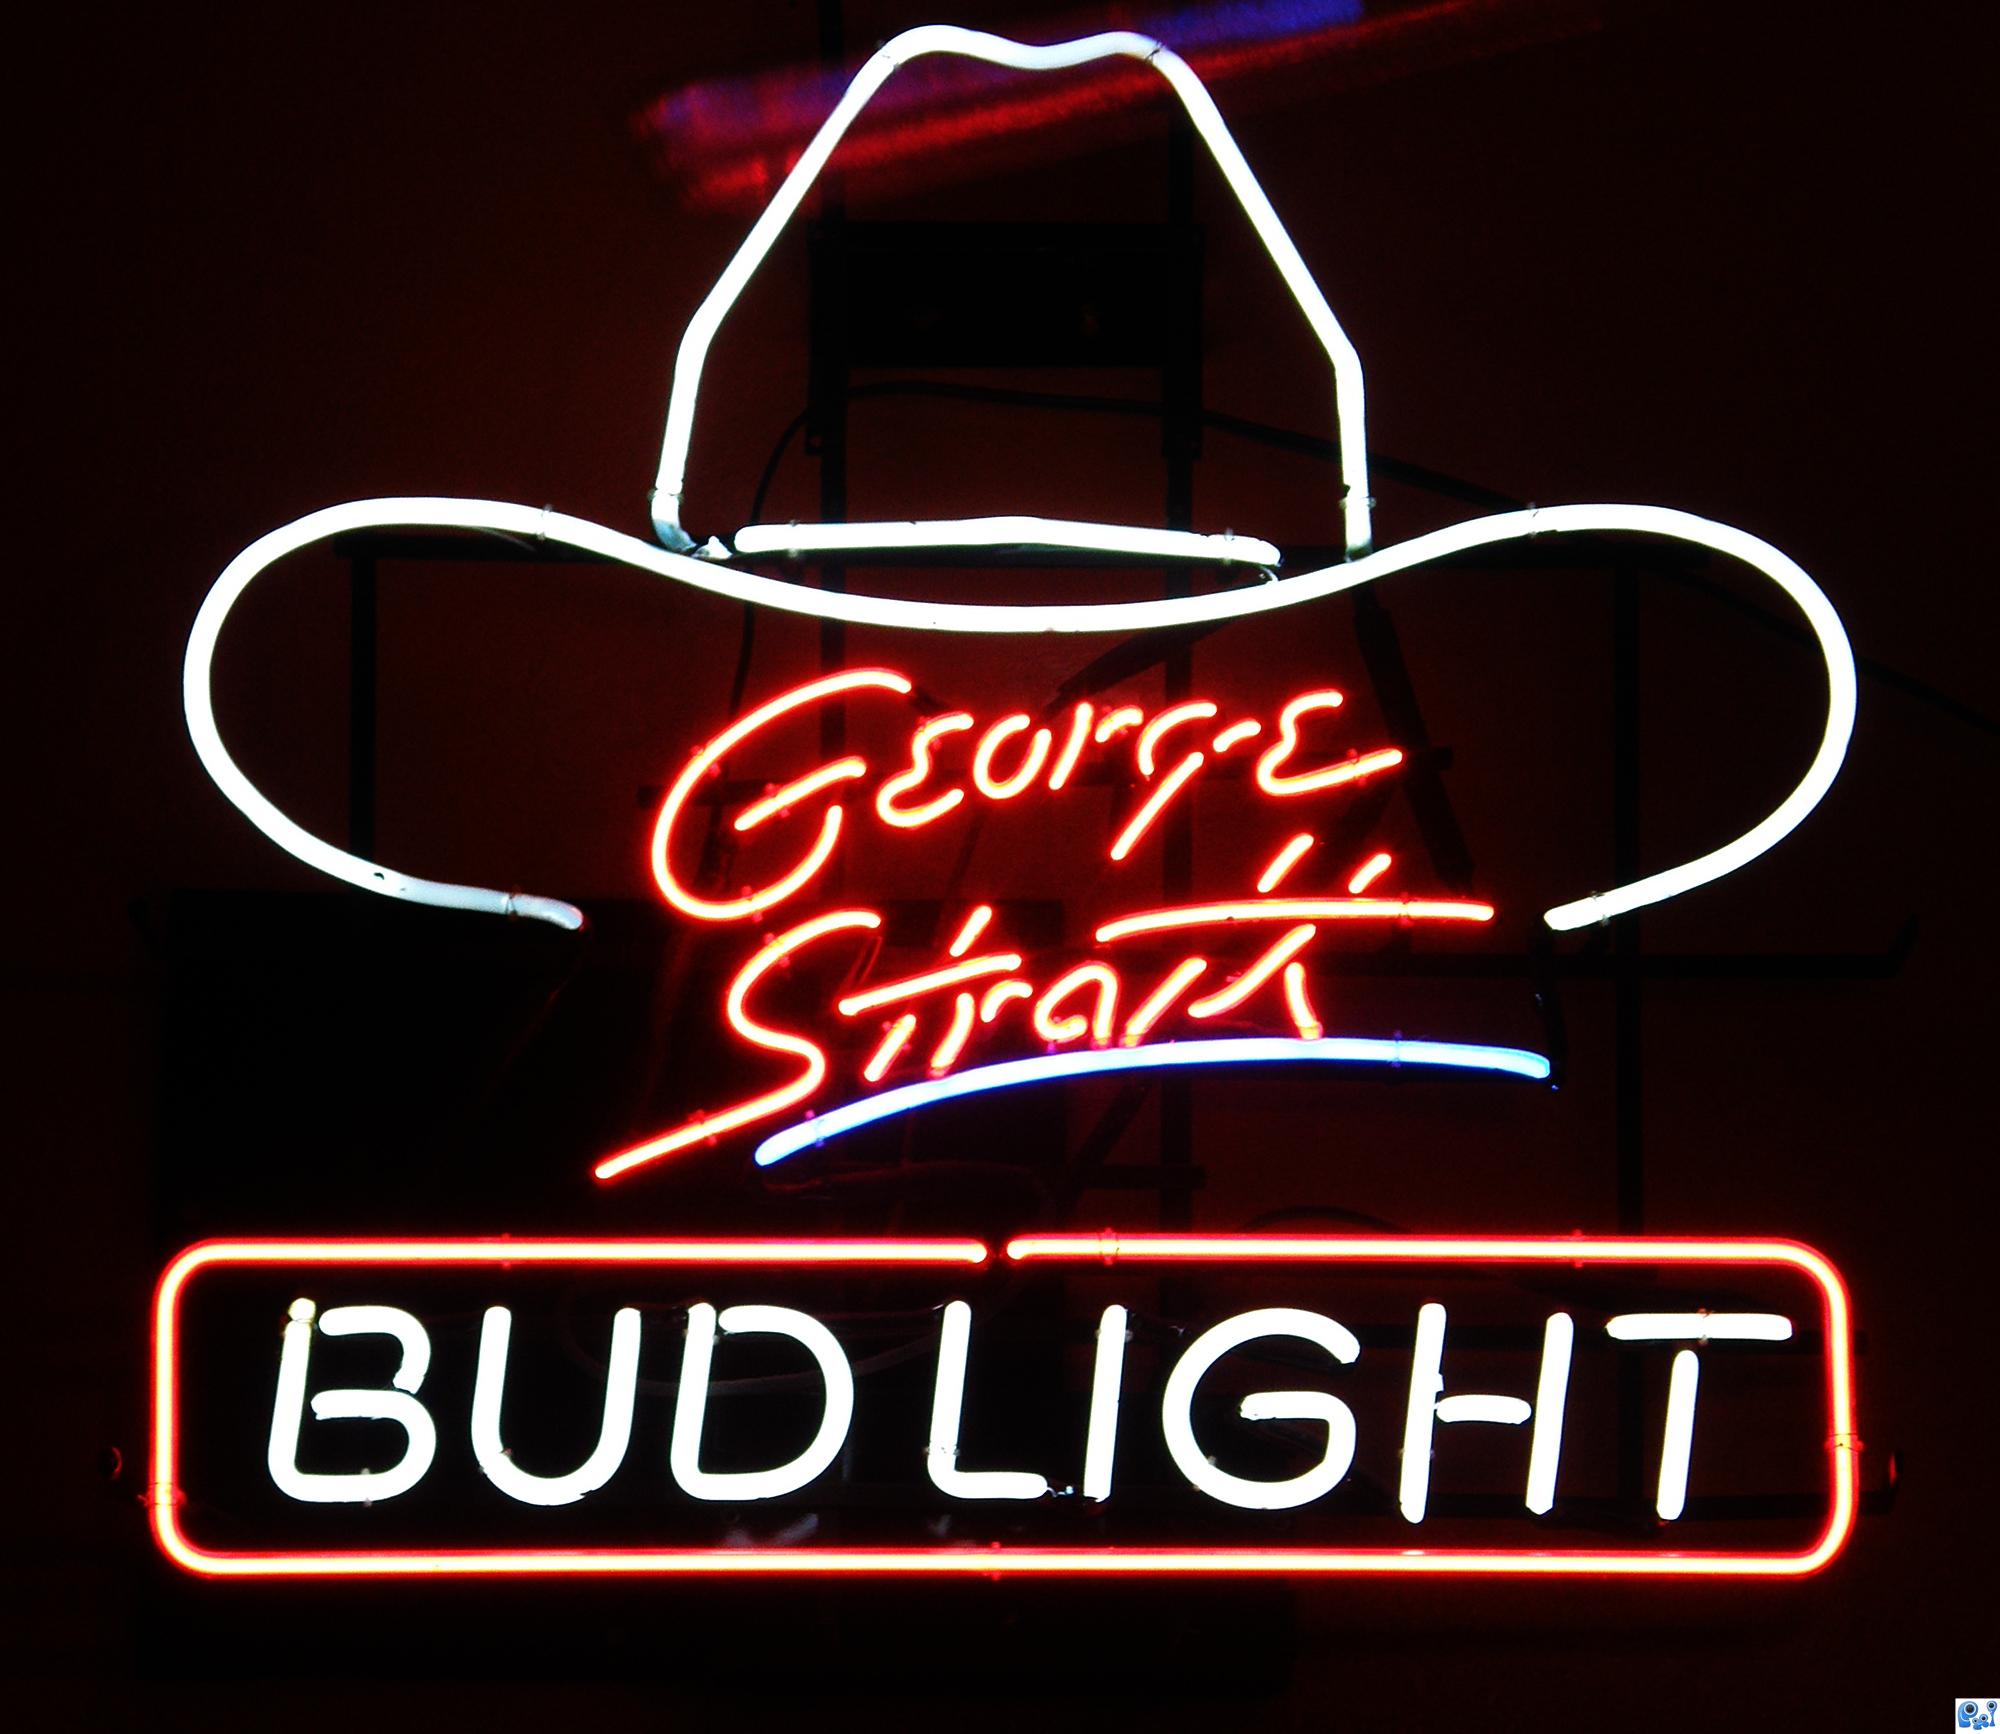 George Strait.... picture, by DrewBlood for: neon signs